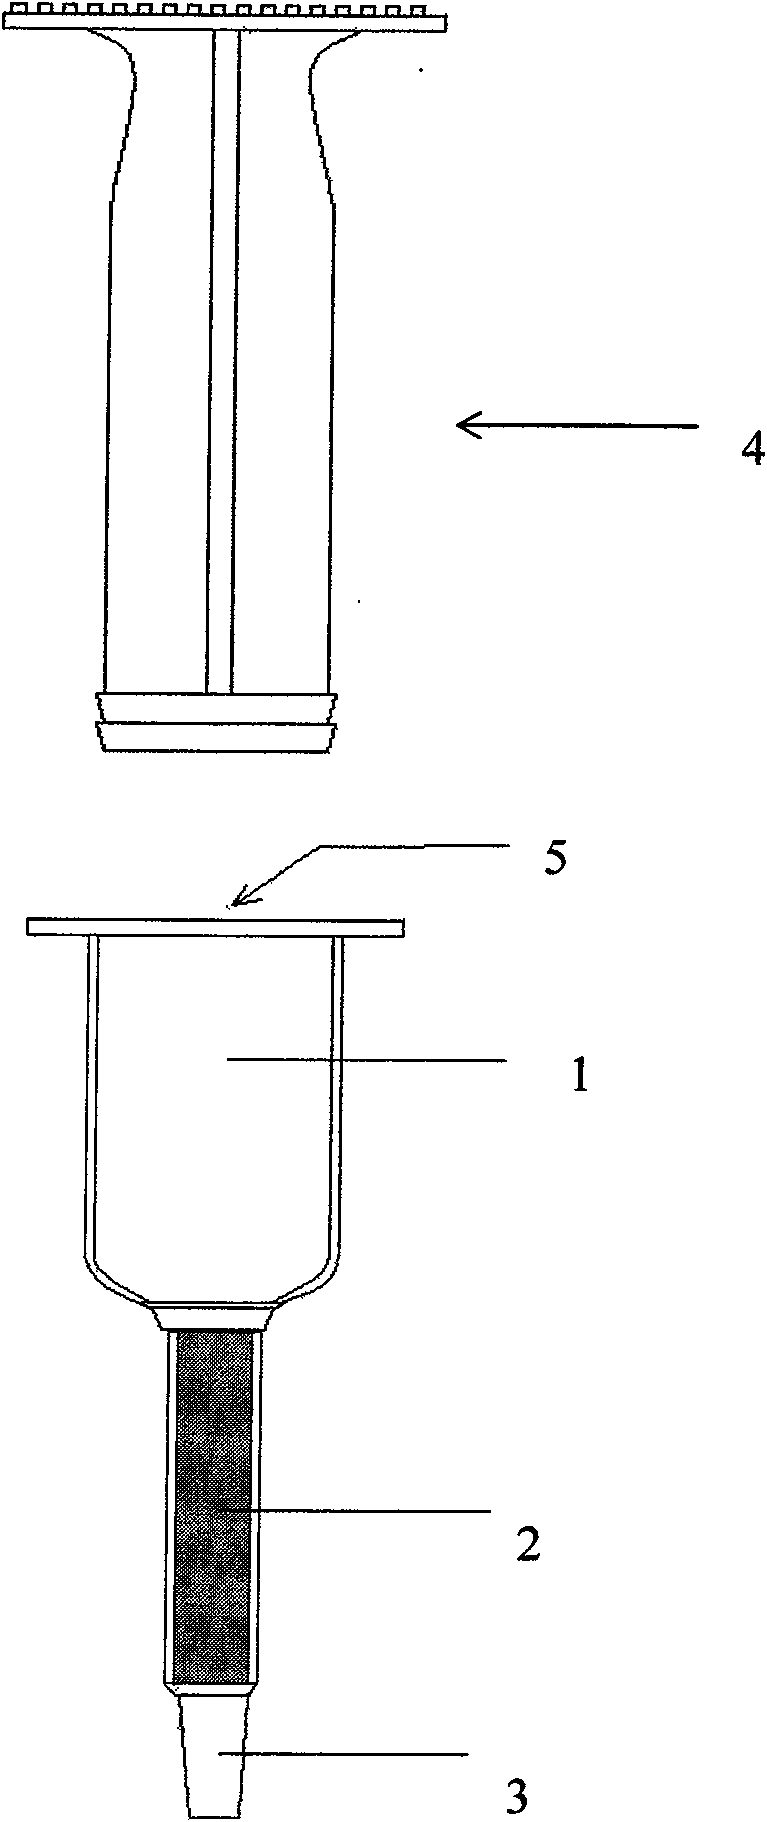 Magnetic separating column and its use in separating biological samples